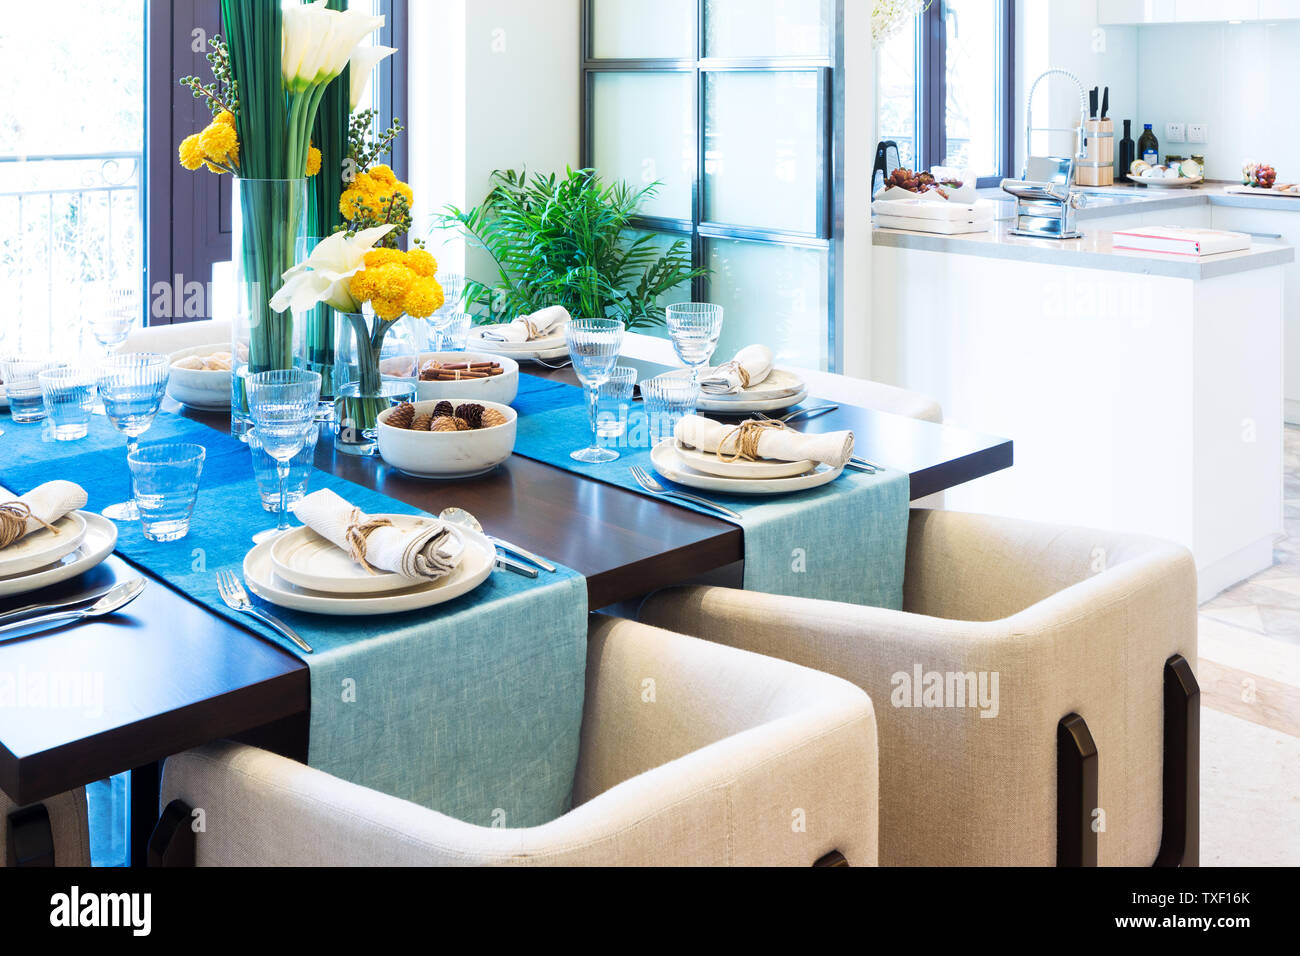 Interior of modern dining rooms Stock Photo